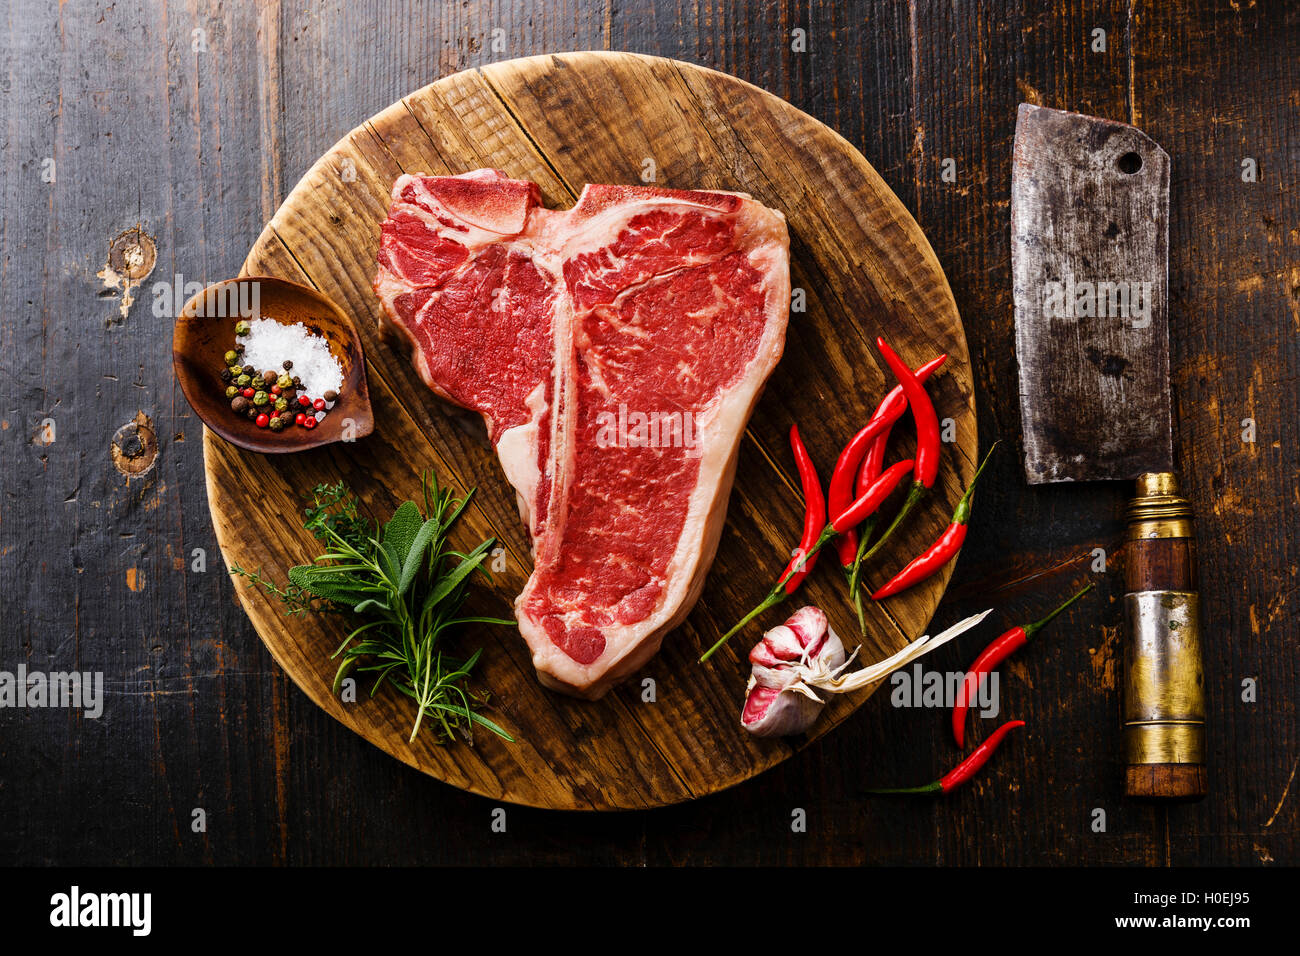 Raw fresh meat T-bone steak, seasoning and Butcher cleaver on chopping cutting board on wooden background Stock Photo